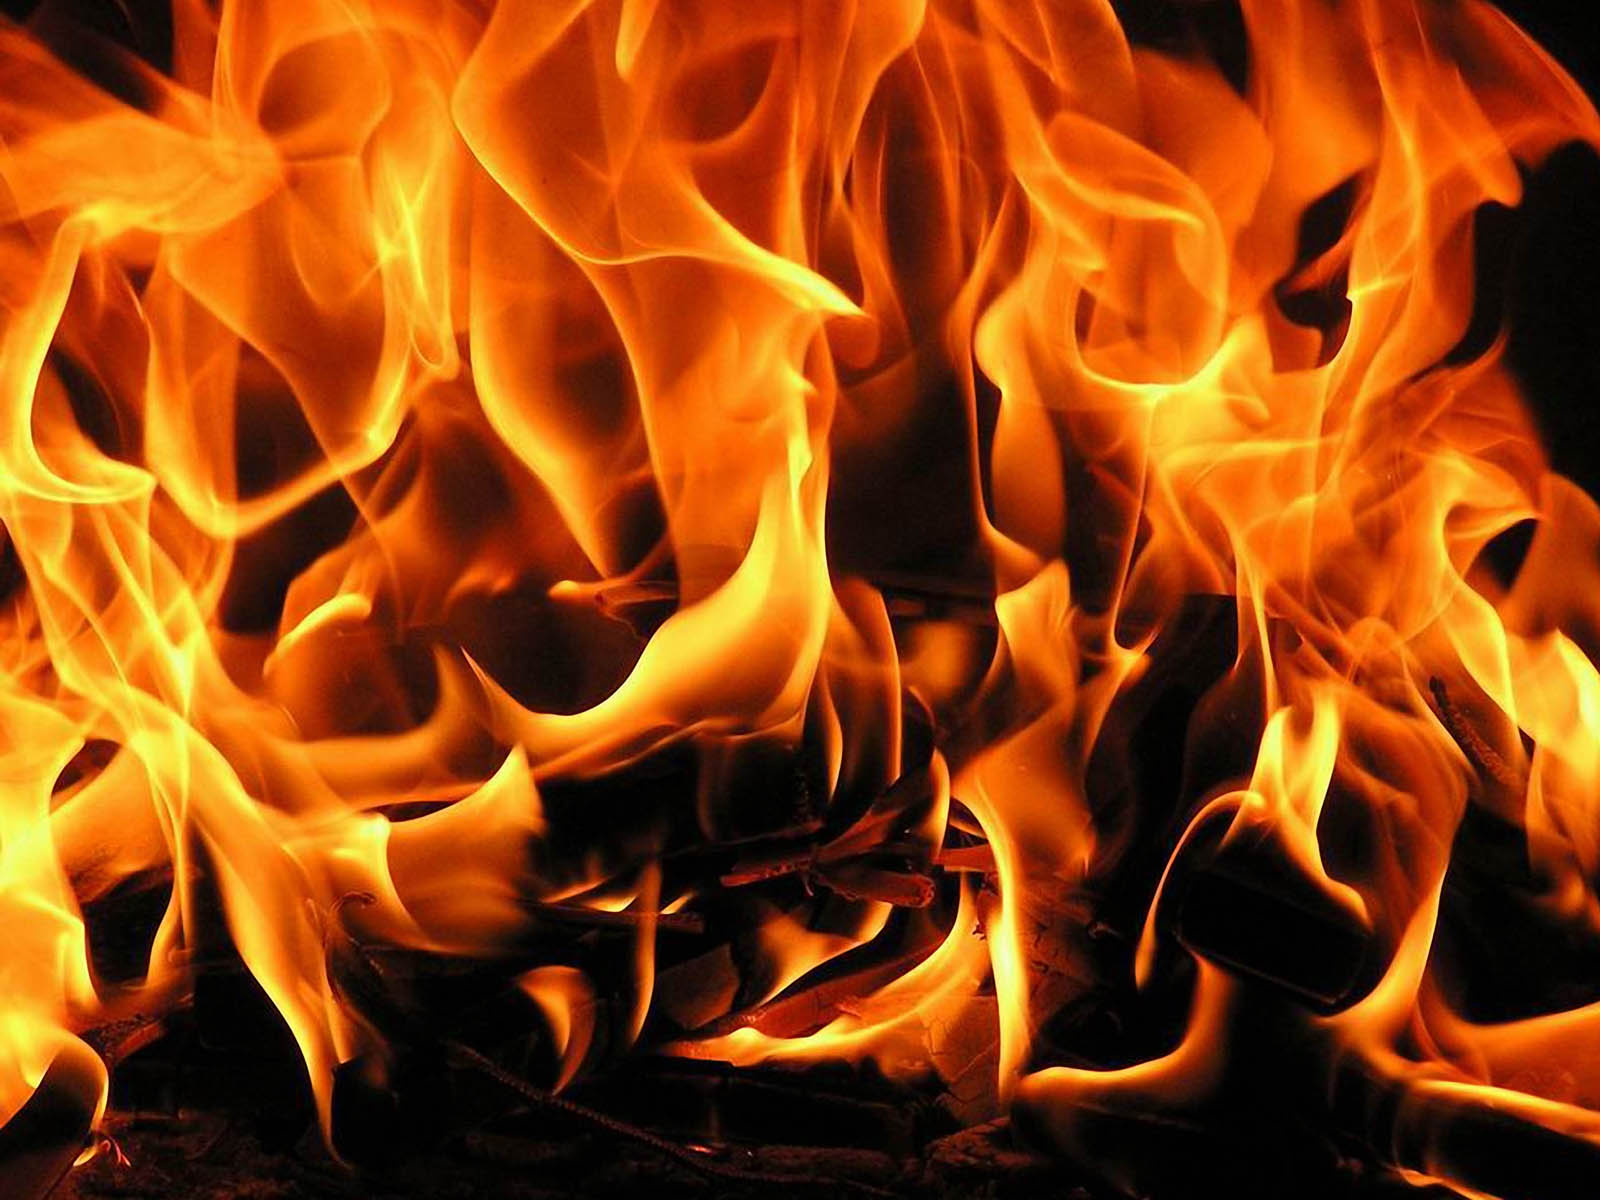 Tag Fire Flames Image Photos Pictures Wallpaper And Background